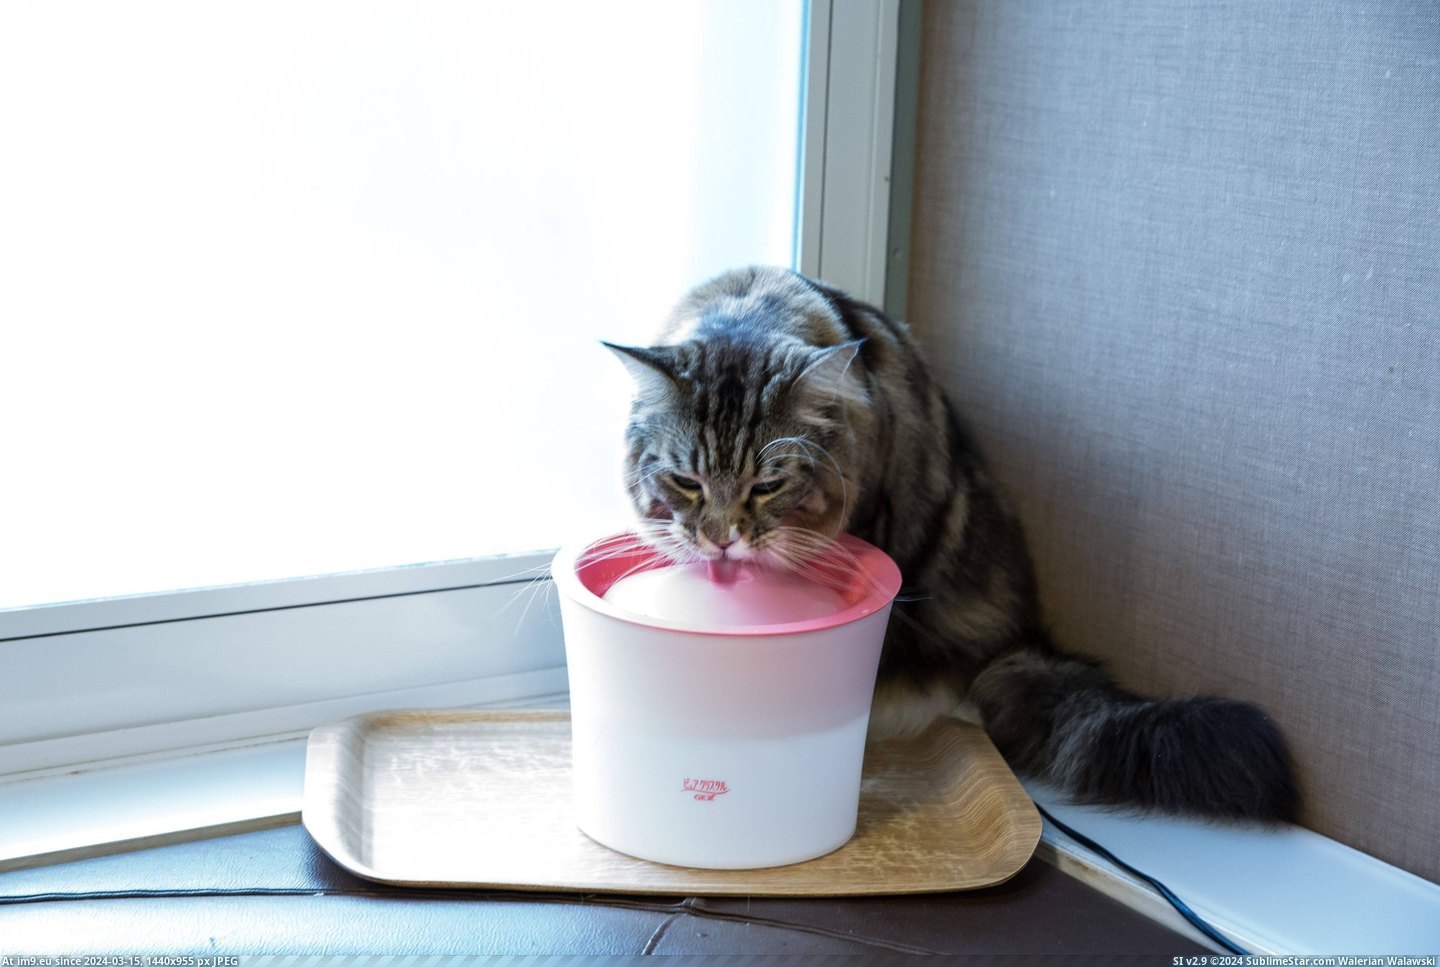 #Cats #Cat #Visited #Tokyo #Cafe [Cats] I visited a cat cafe in Tokyo... 17 Pic. (Изображение из альбом My r/CATS favs))